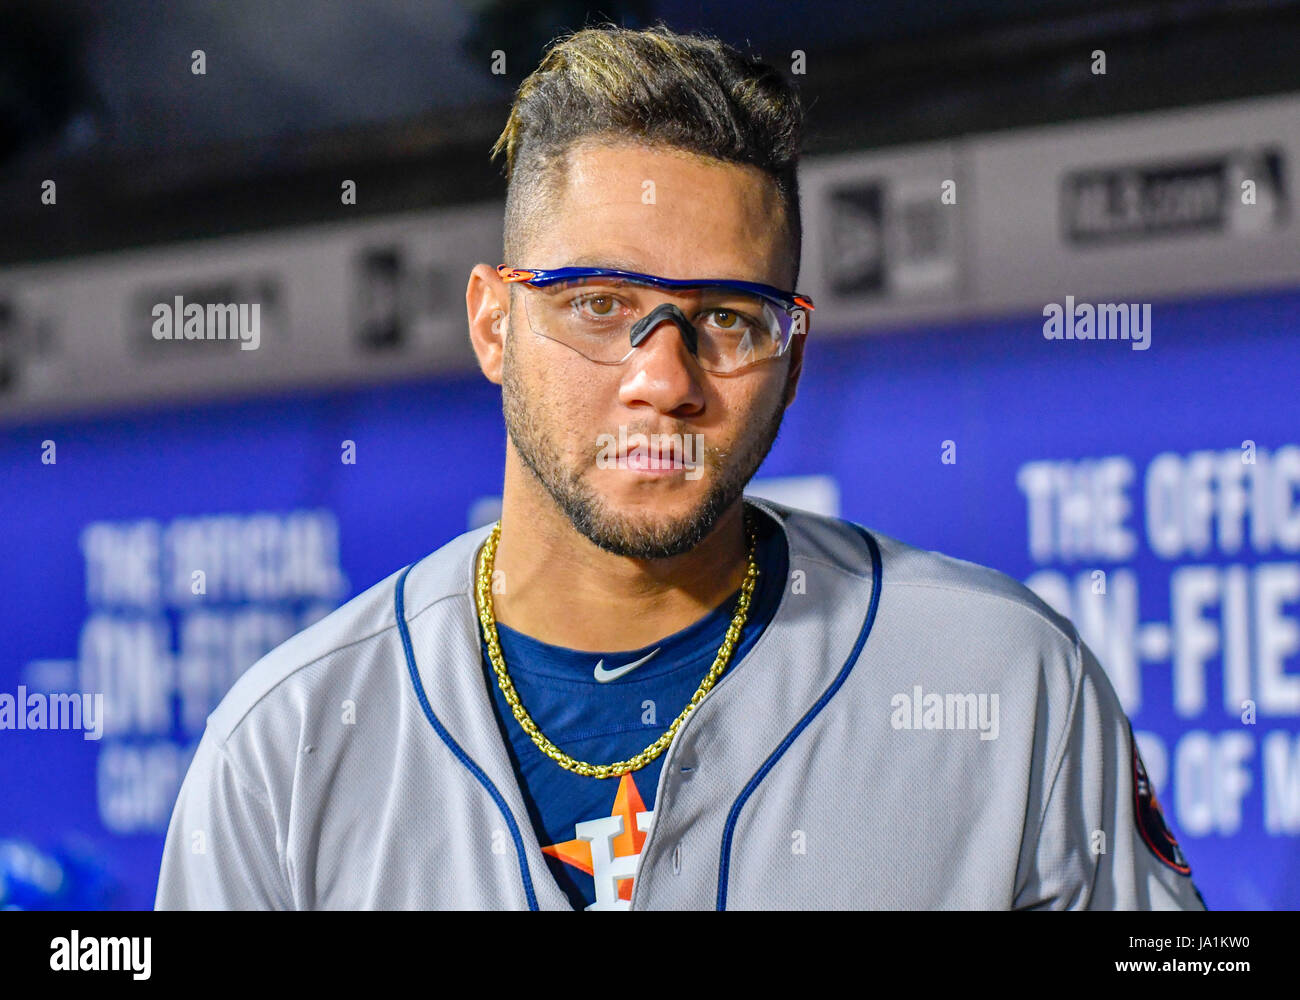 JUN 02, 2017: Houston Astros first baseman Yuli Gurriel #10 during an MLB  game between the Houston Astros and the Texas Rangers at Globe Life Park in  Arlington, TX Houston defeated Texas